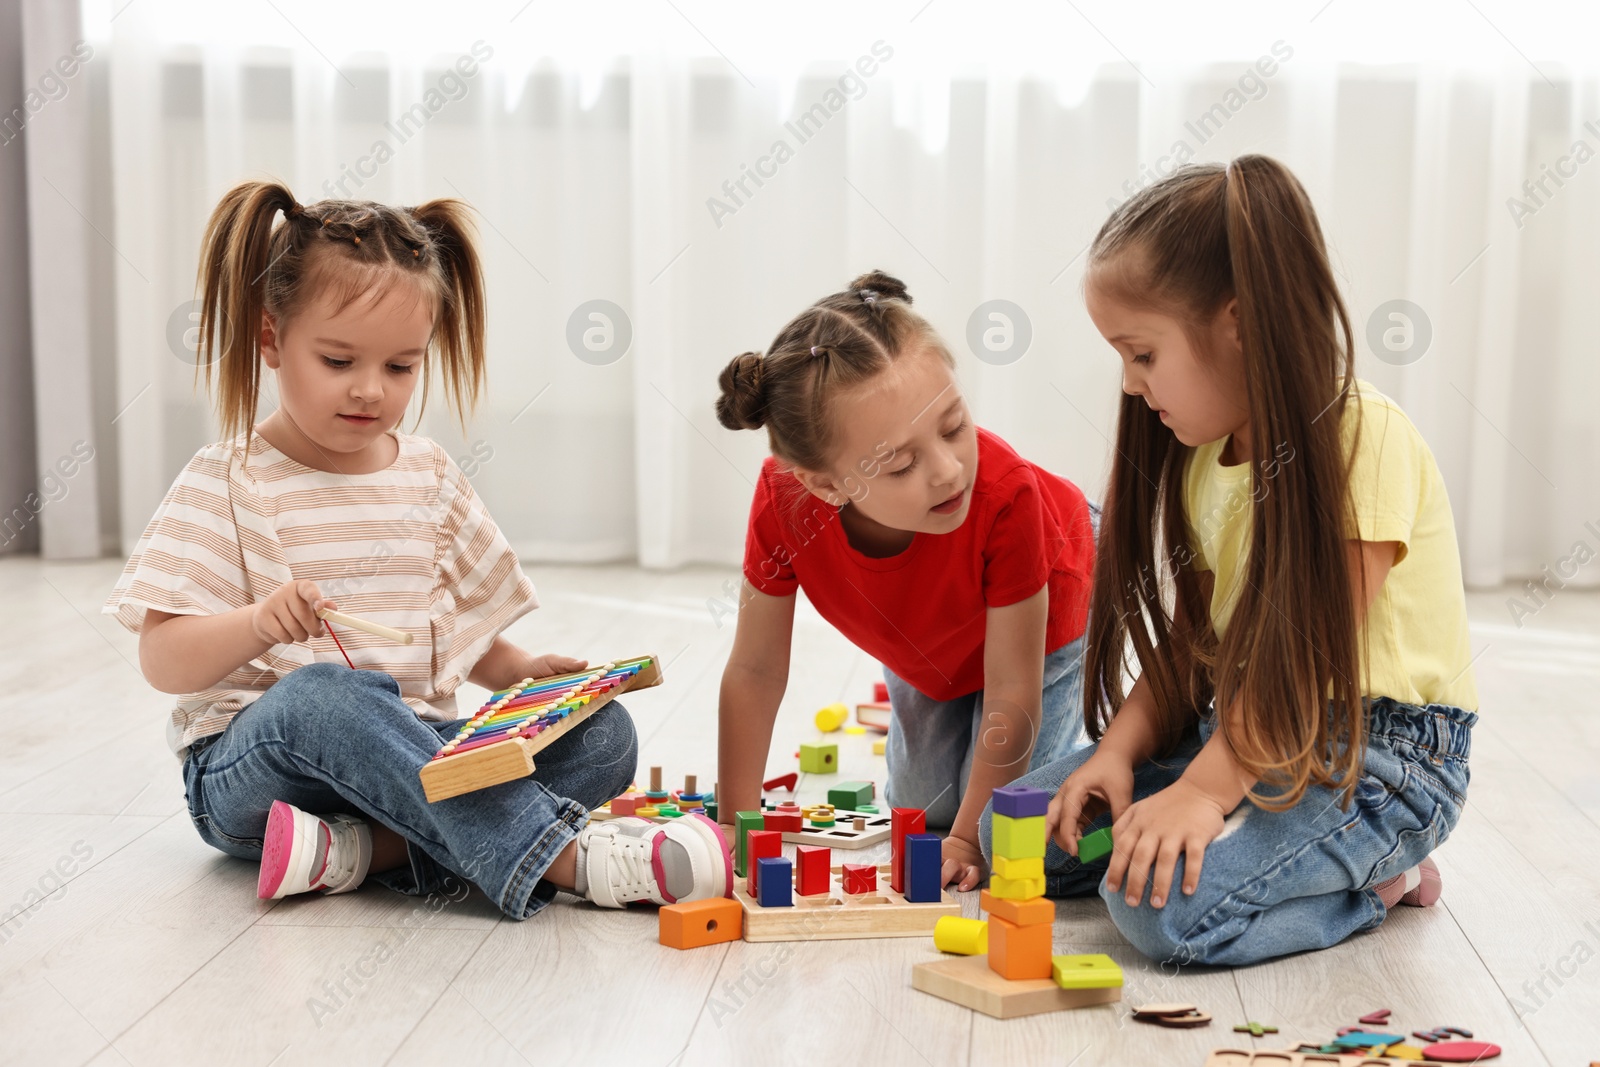 Photo of Cute little children playing together on floor indoors